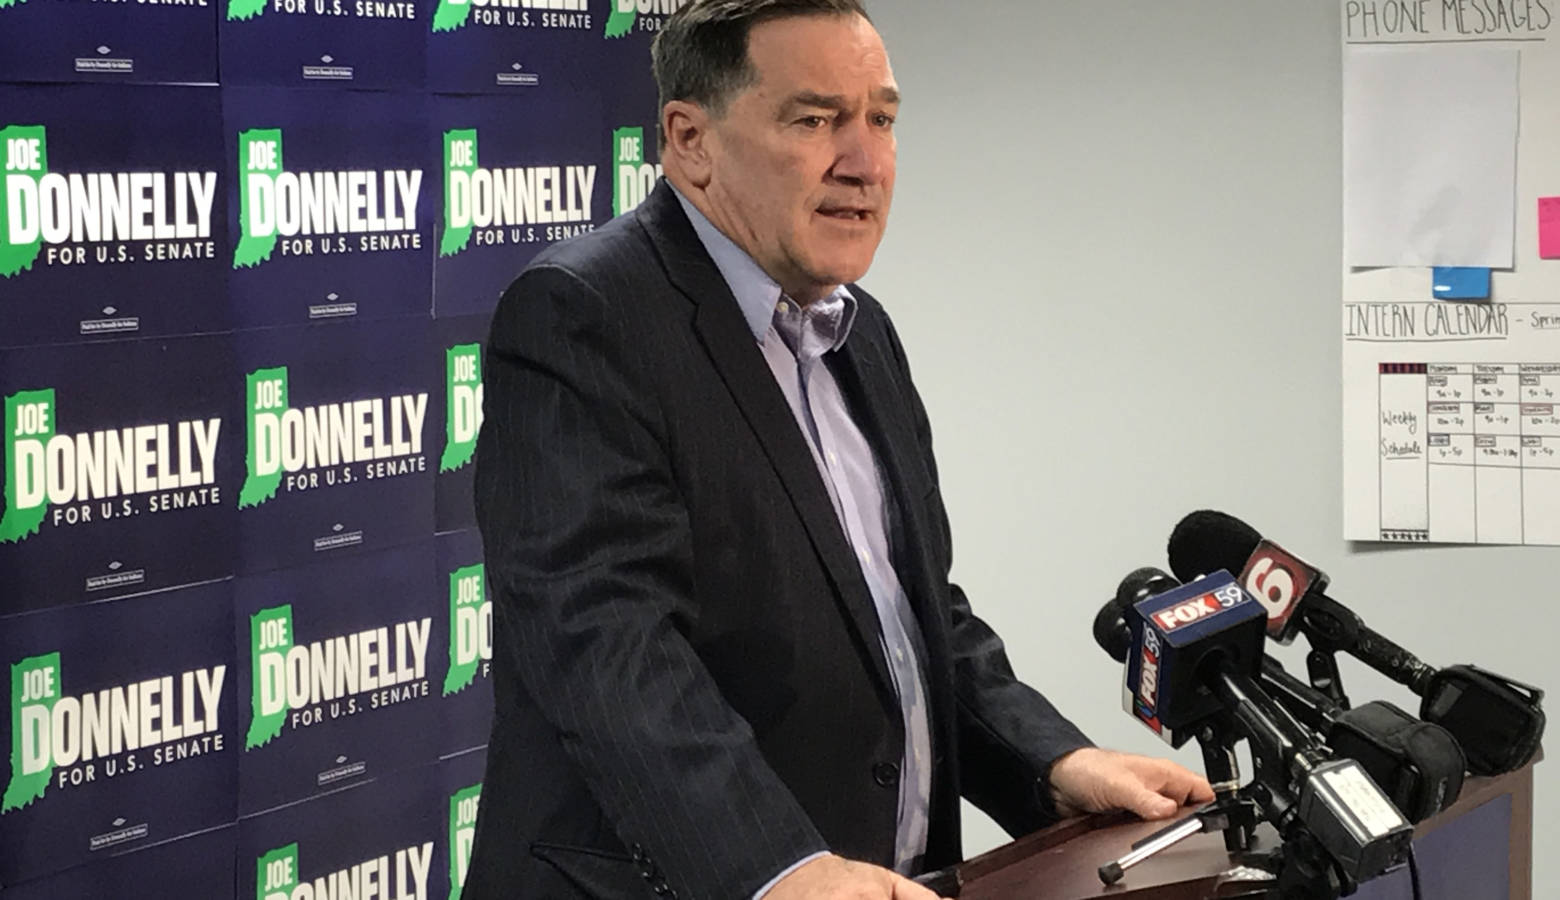 The Indiana Republican Party filed an ethics complaint against Sen.  Joe Donnelly (D-Ind). (Brandon Smith/IPB News)